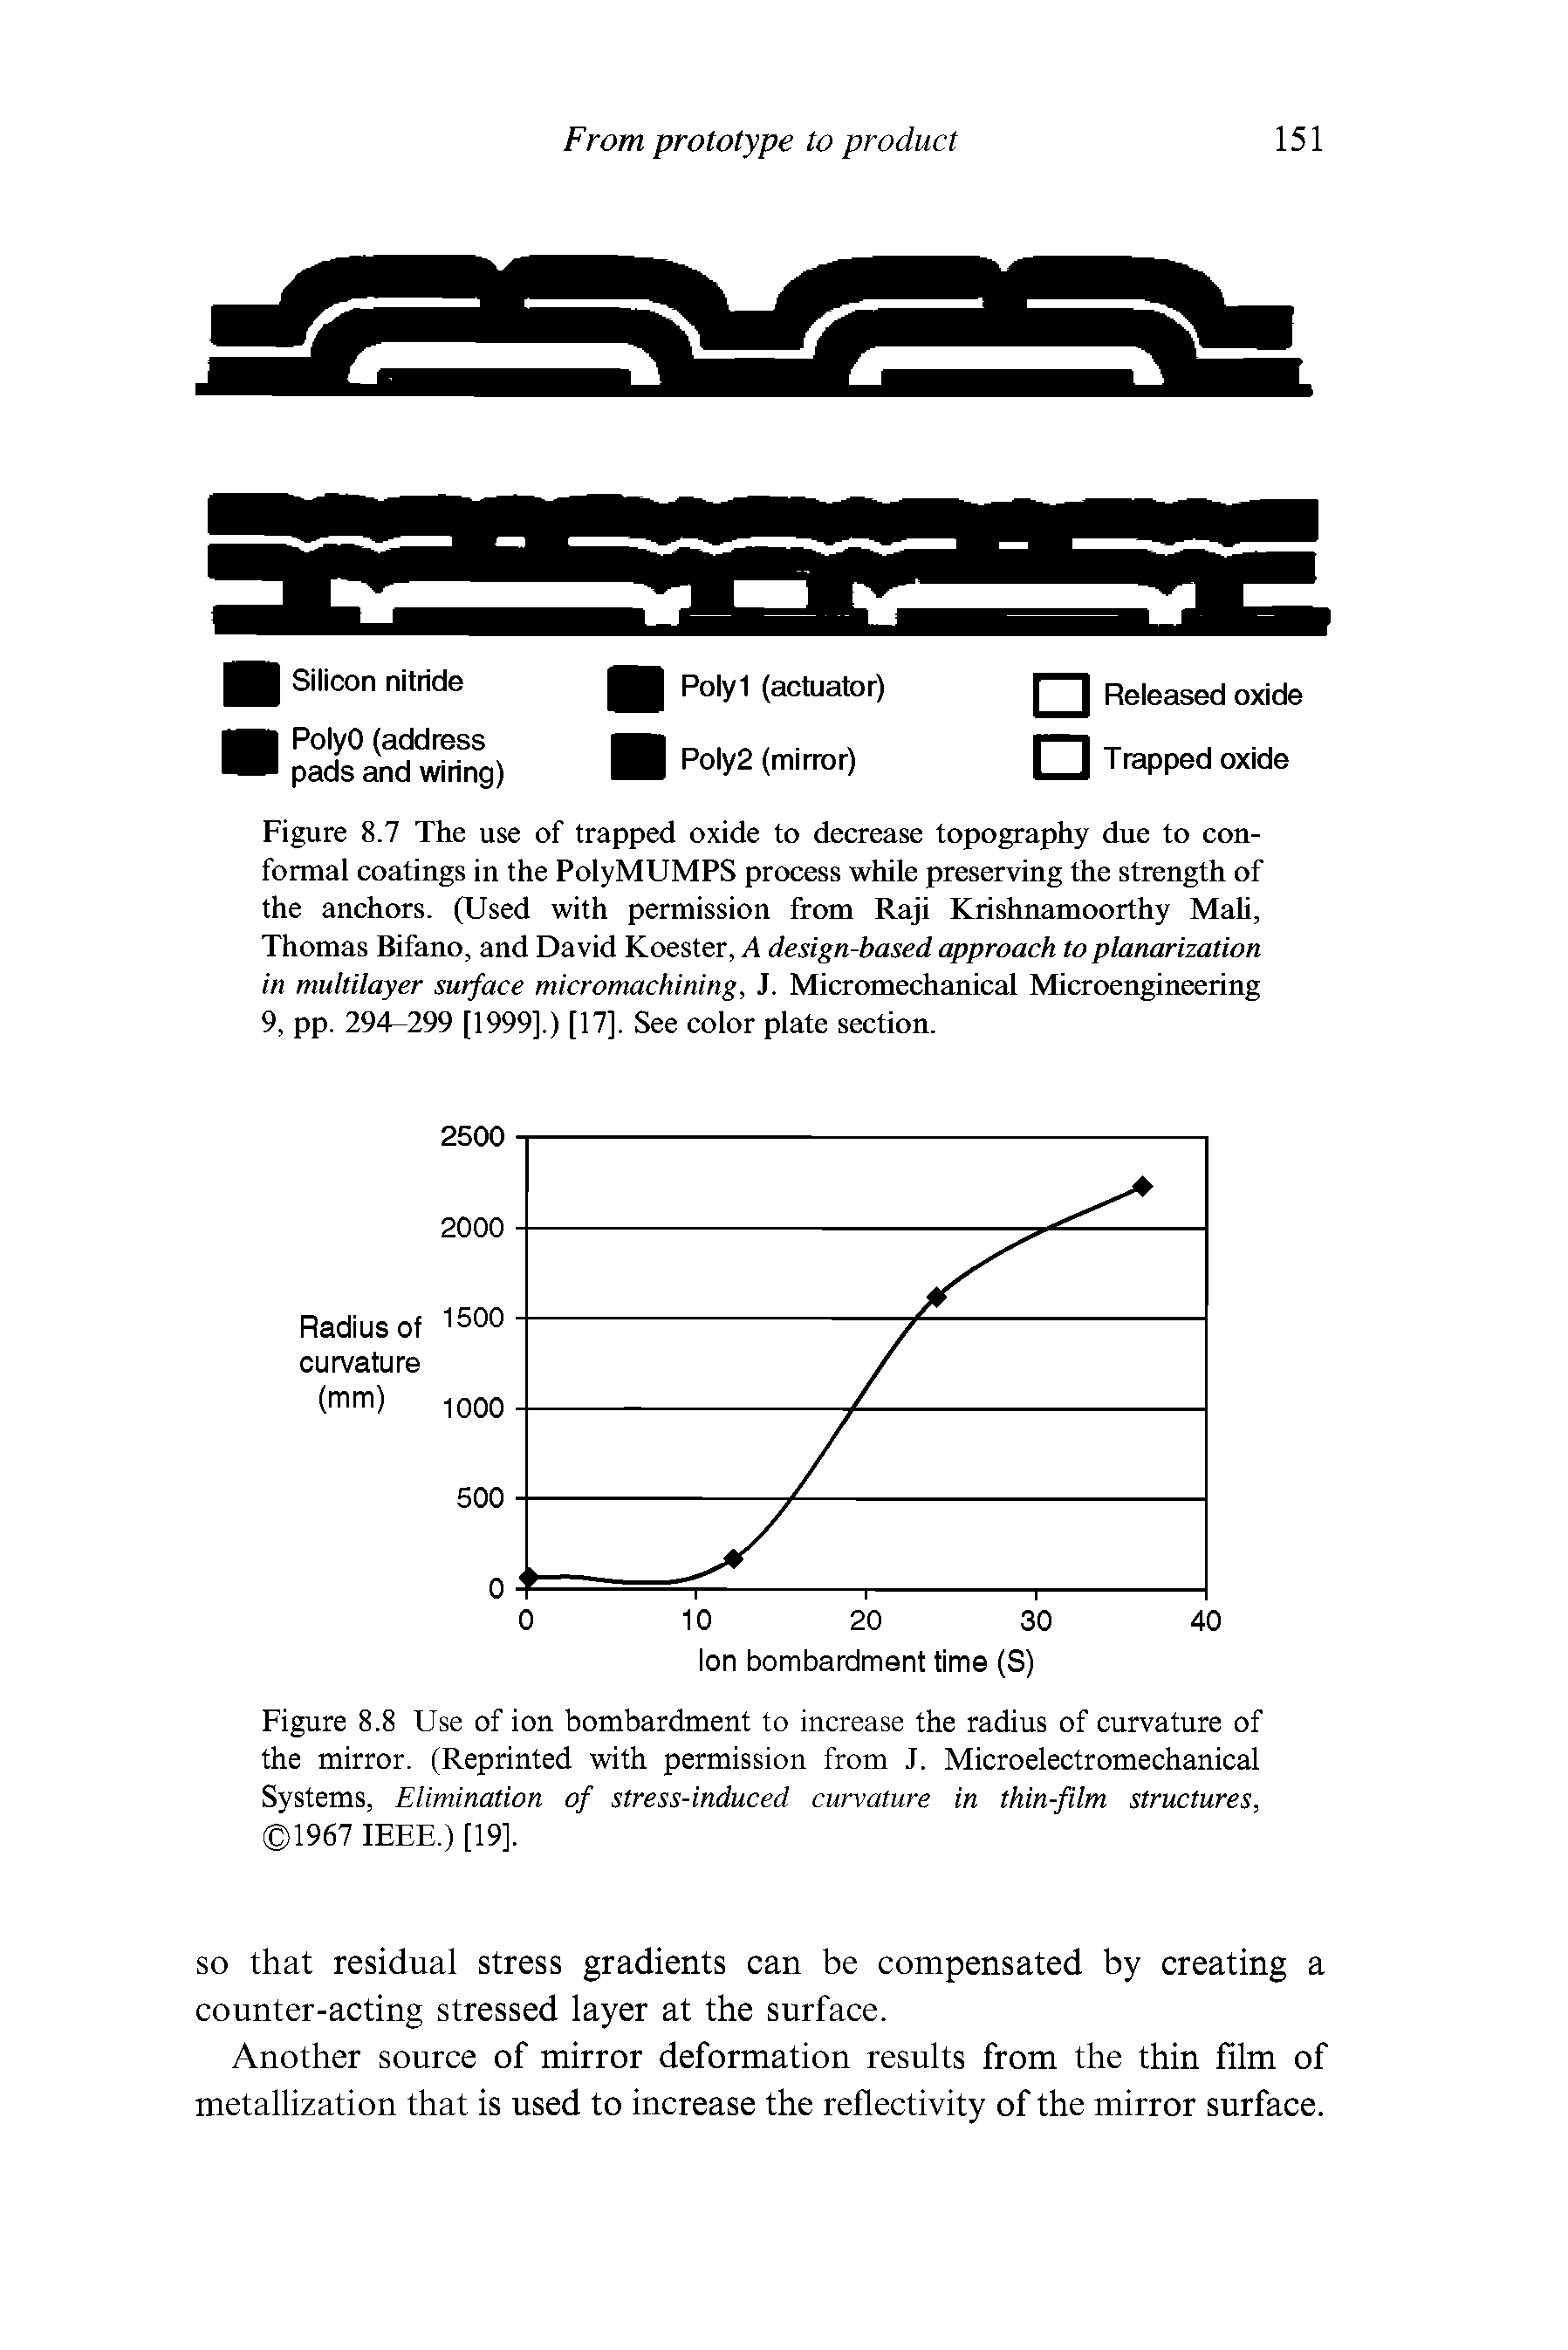 Figure 8.7 The use of trapped oxide to decrease topography due to conformal coatings in the PolyMUMPS process while preserving the strength of the anchors. (Used with permission from Raji Krishnamoorthy Mali, Thomas Bifano, and David Koester, A design-based approach to planarization in multilayer surface micromachining, J. Micromechanical Microengineering 9, pp. 294-299 [1999].) [17]. See color plate section.